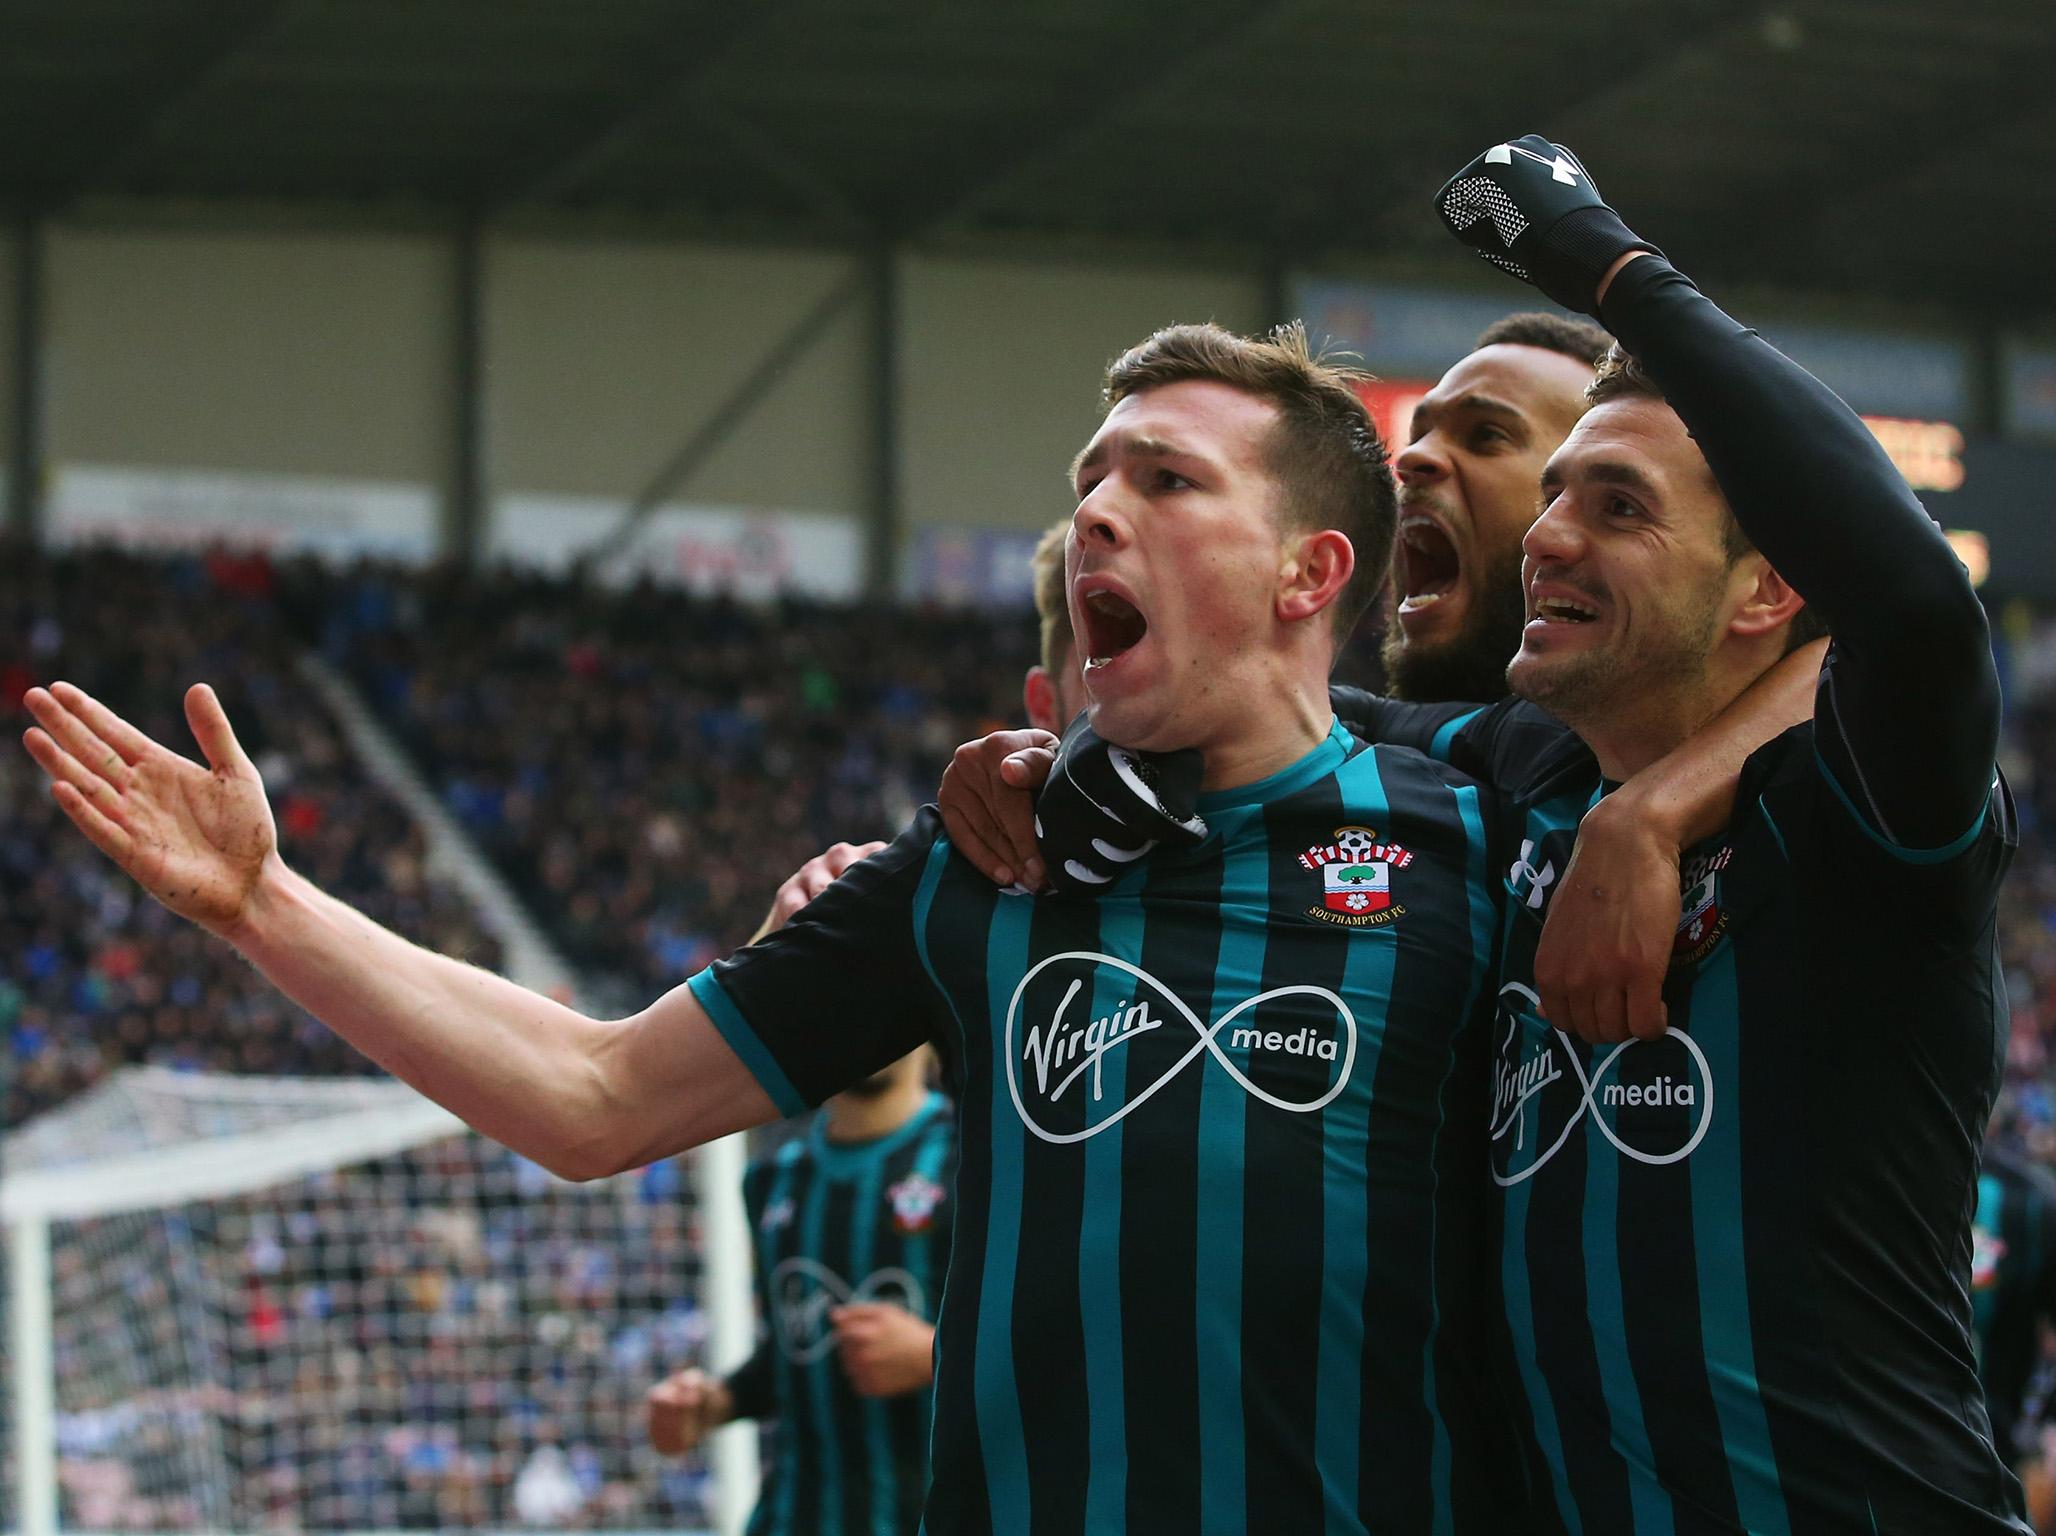 Southampton ended Wigan's fairytale cup run at the DW Stadium